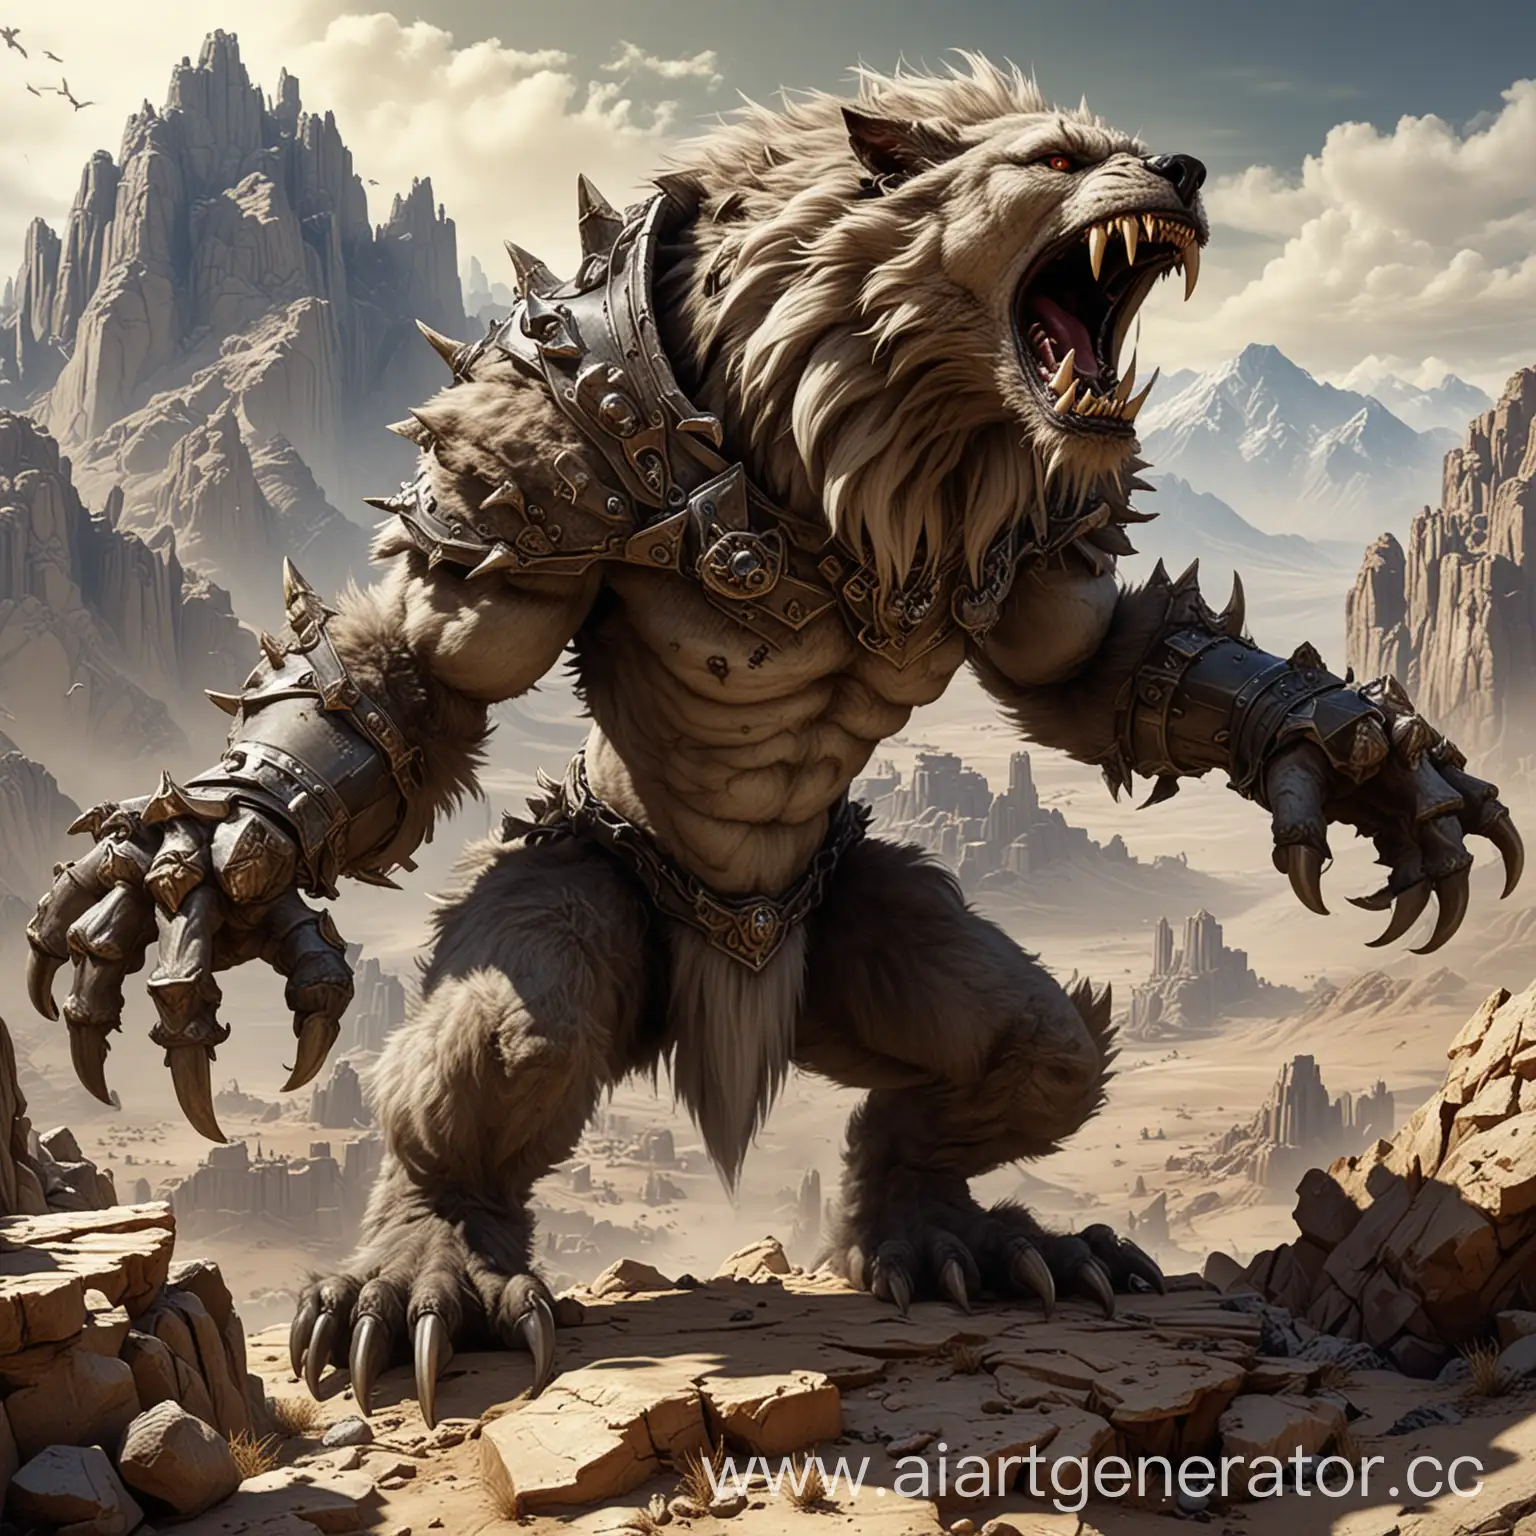 Majestic-Creature-of-Heroes-of-Might-and-Magic-3-Hulking-Beast-with-Massive-Claws-in-a-Mountainous-Desert-Landscape